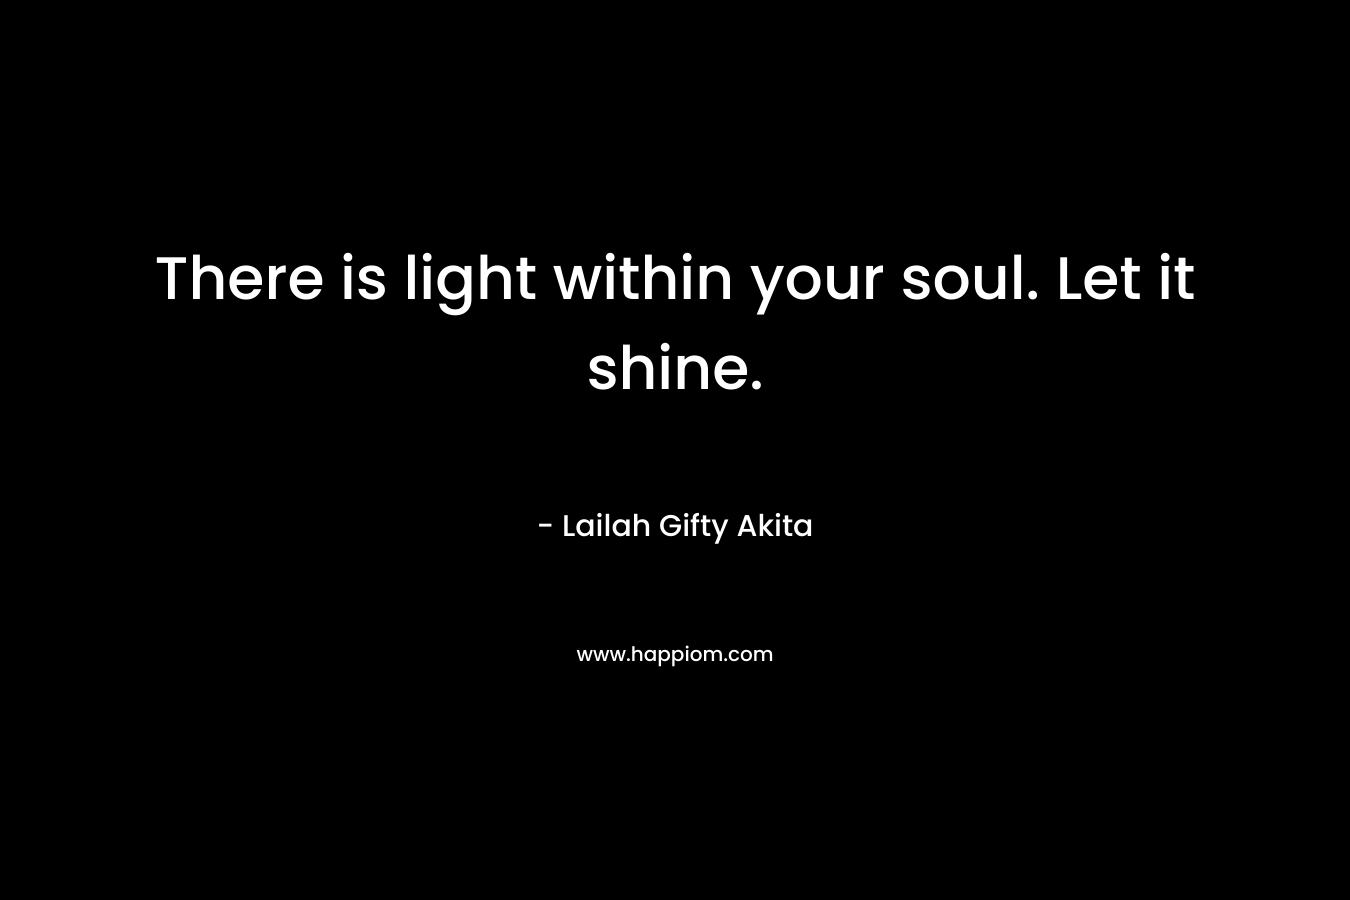 There is light within your soul. Let it shine.